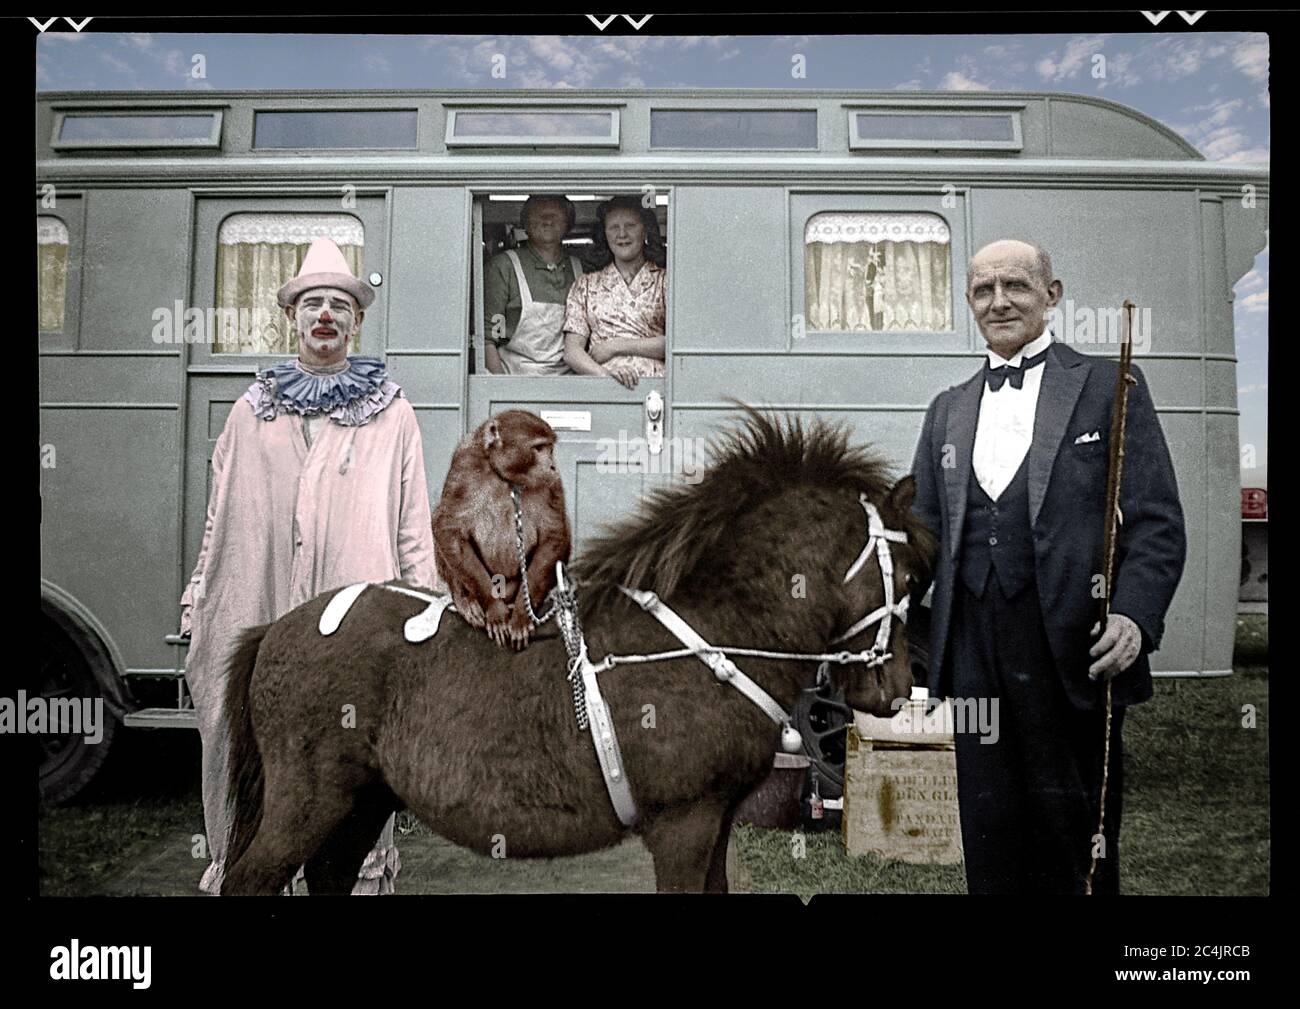 Circus trailer with performers in England, 1948. Image colorized from 6x9 cm B&W negative. Stock Photo